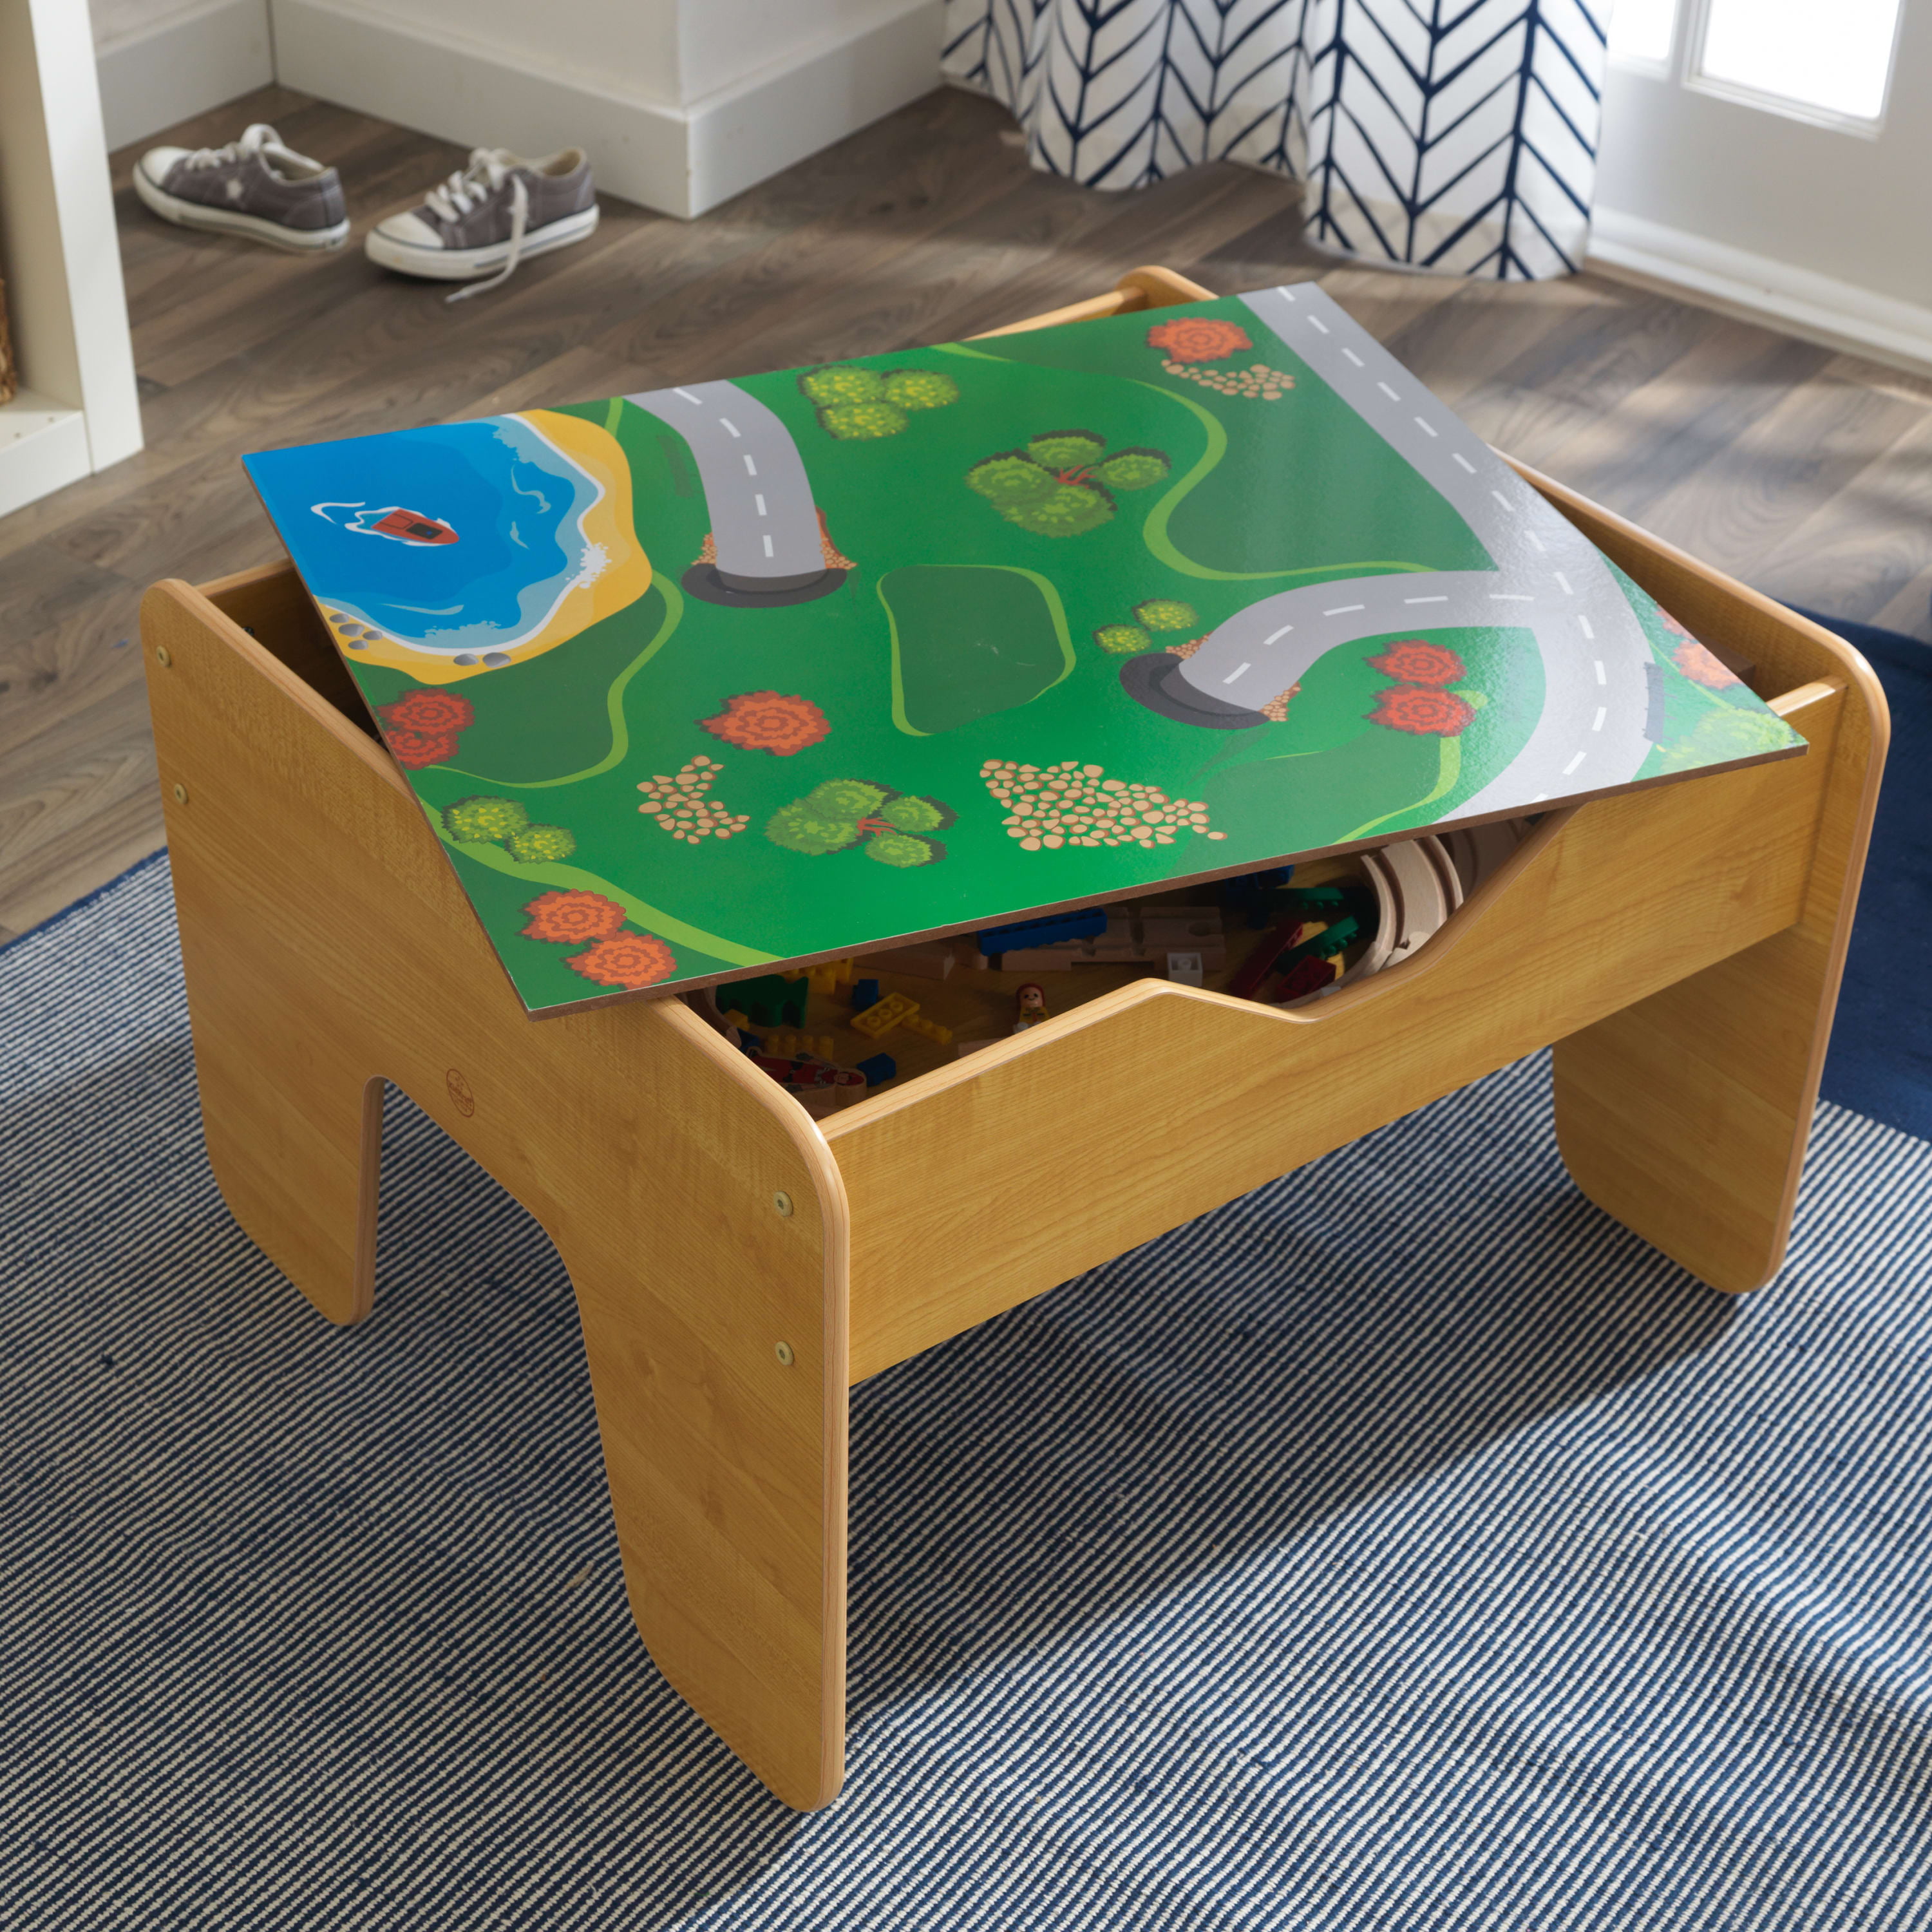 KidKraft Reversible Wooden Activity Table with Board and Train Set, Natural, for Ages 3+ Years - image 9 of 11